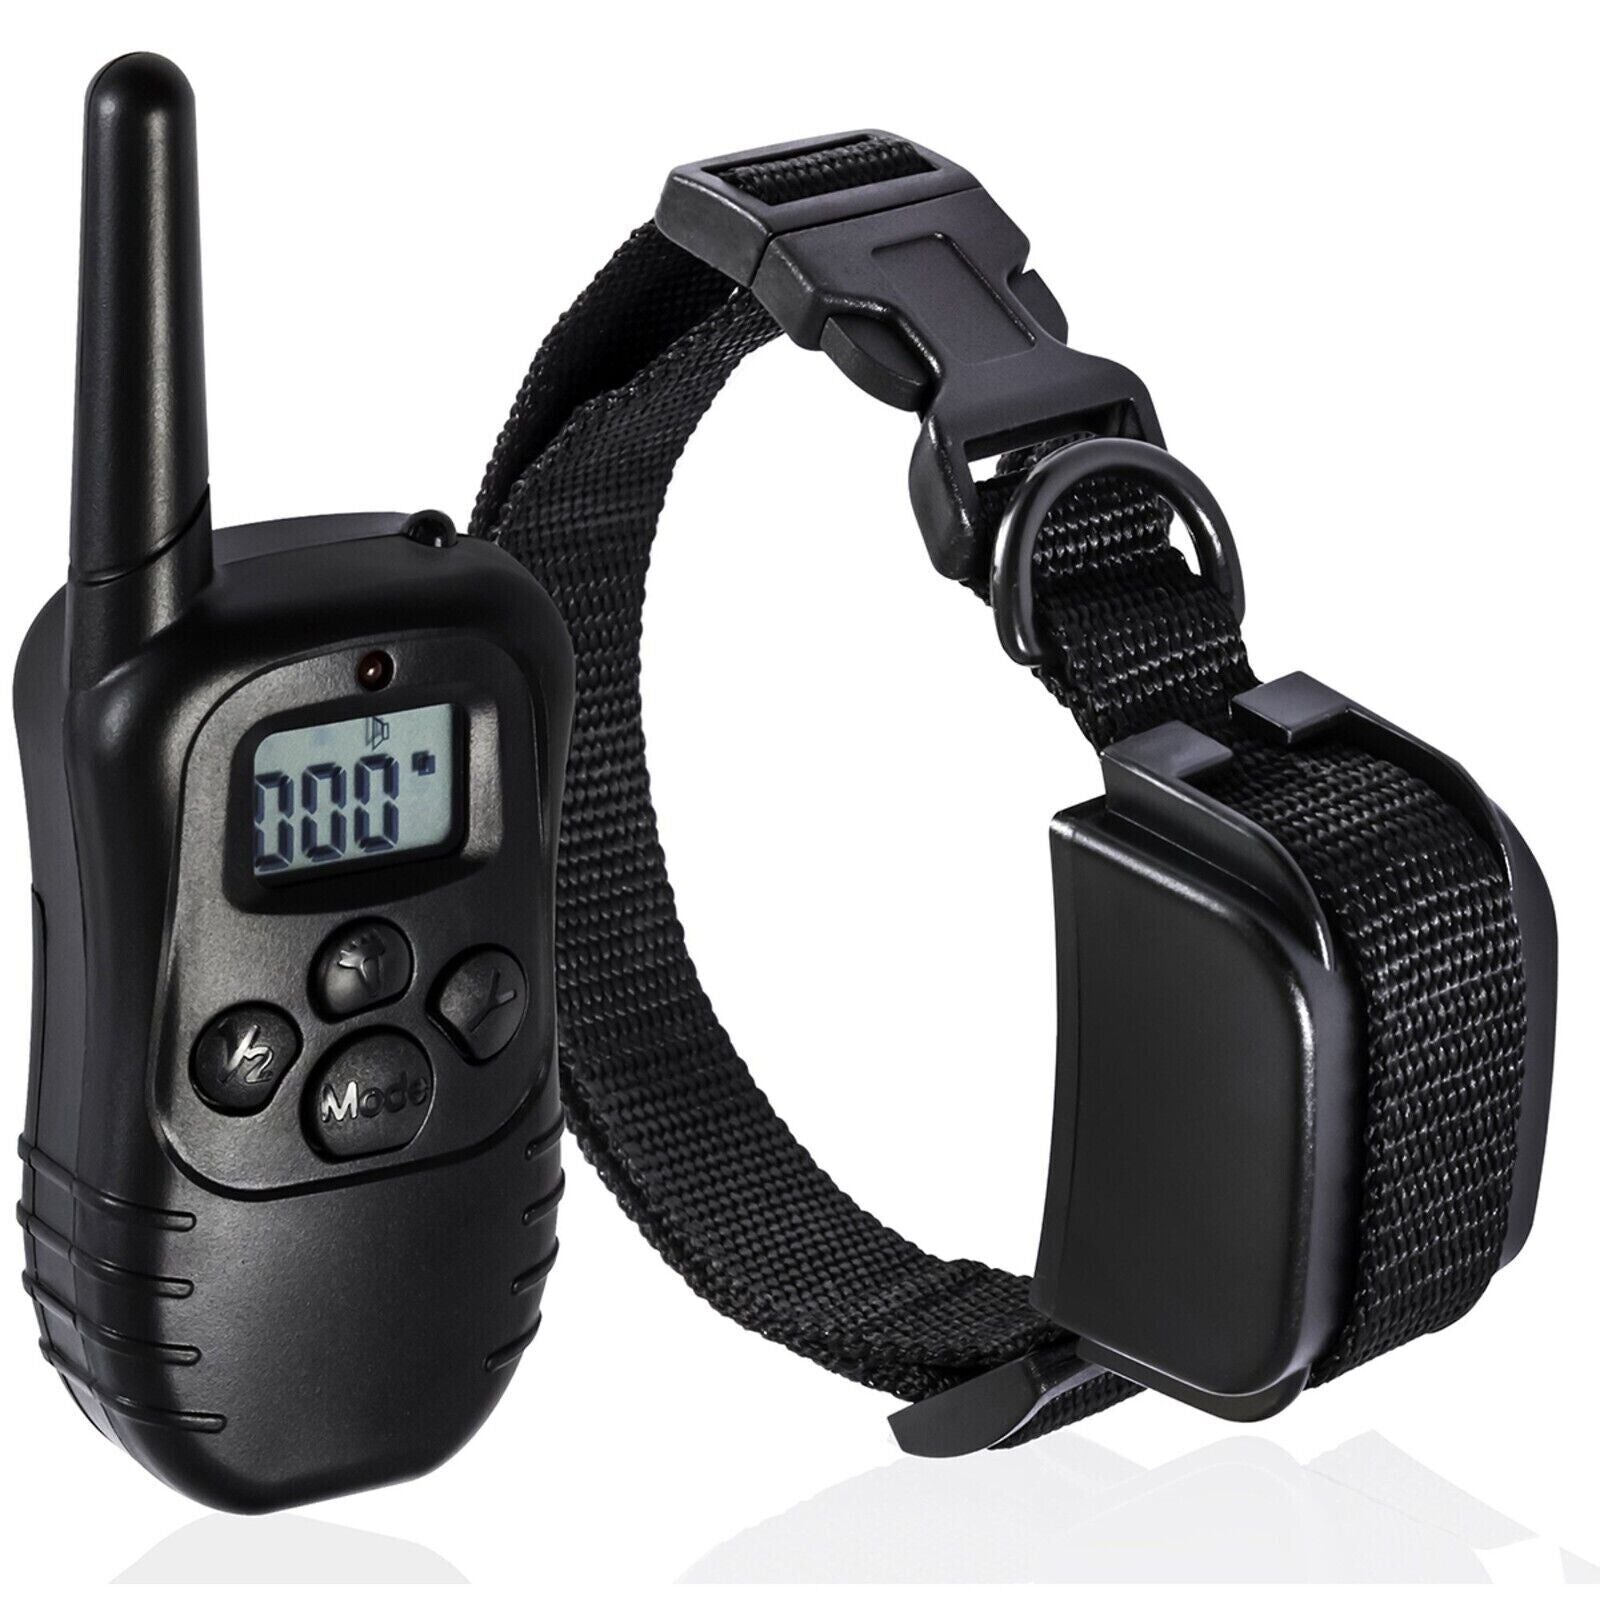 Train Your Dog with Precision: 950 FT Remote Dog Training Shock Collar